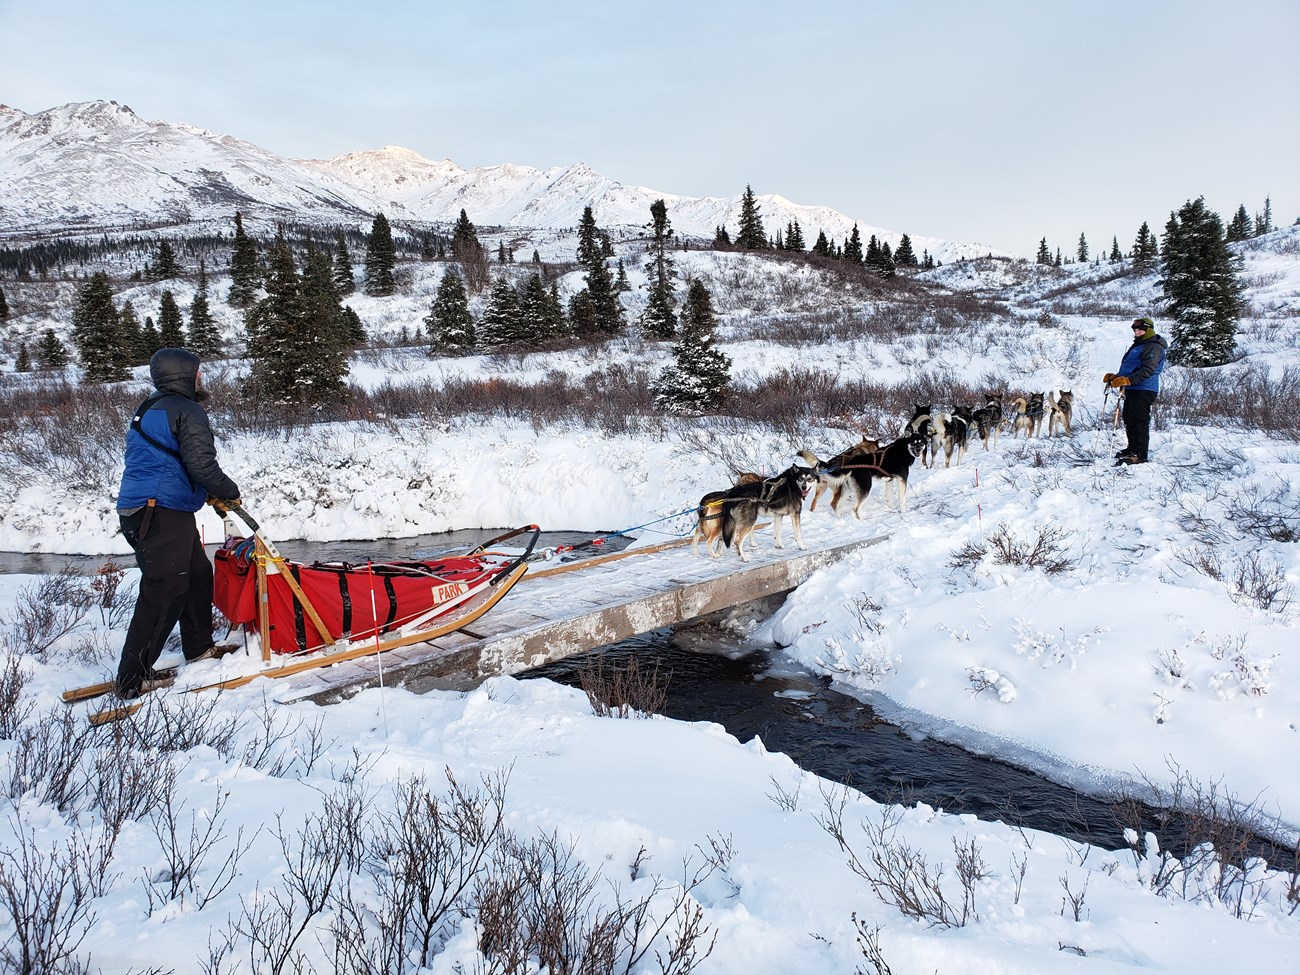 A team of sled dogs goes across a bridge over a small creek